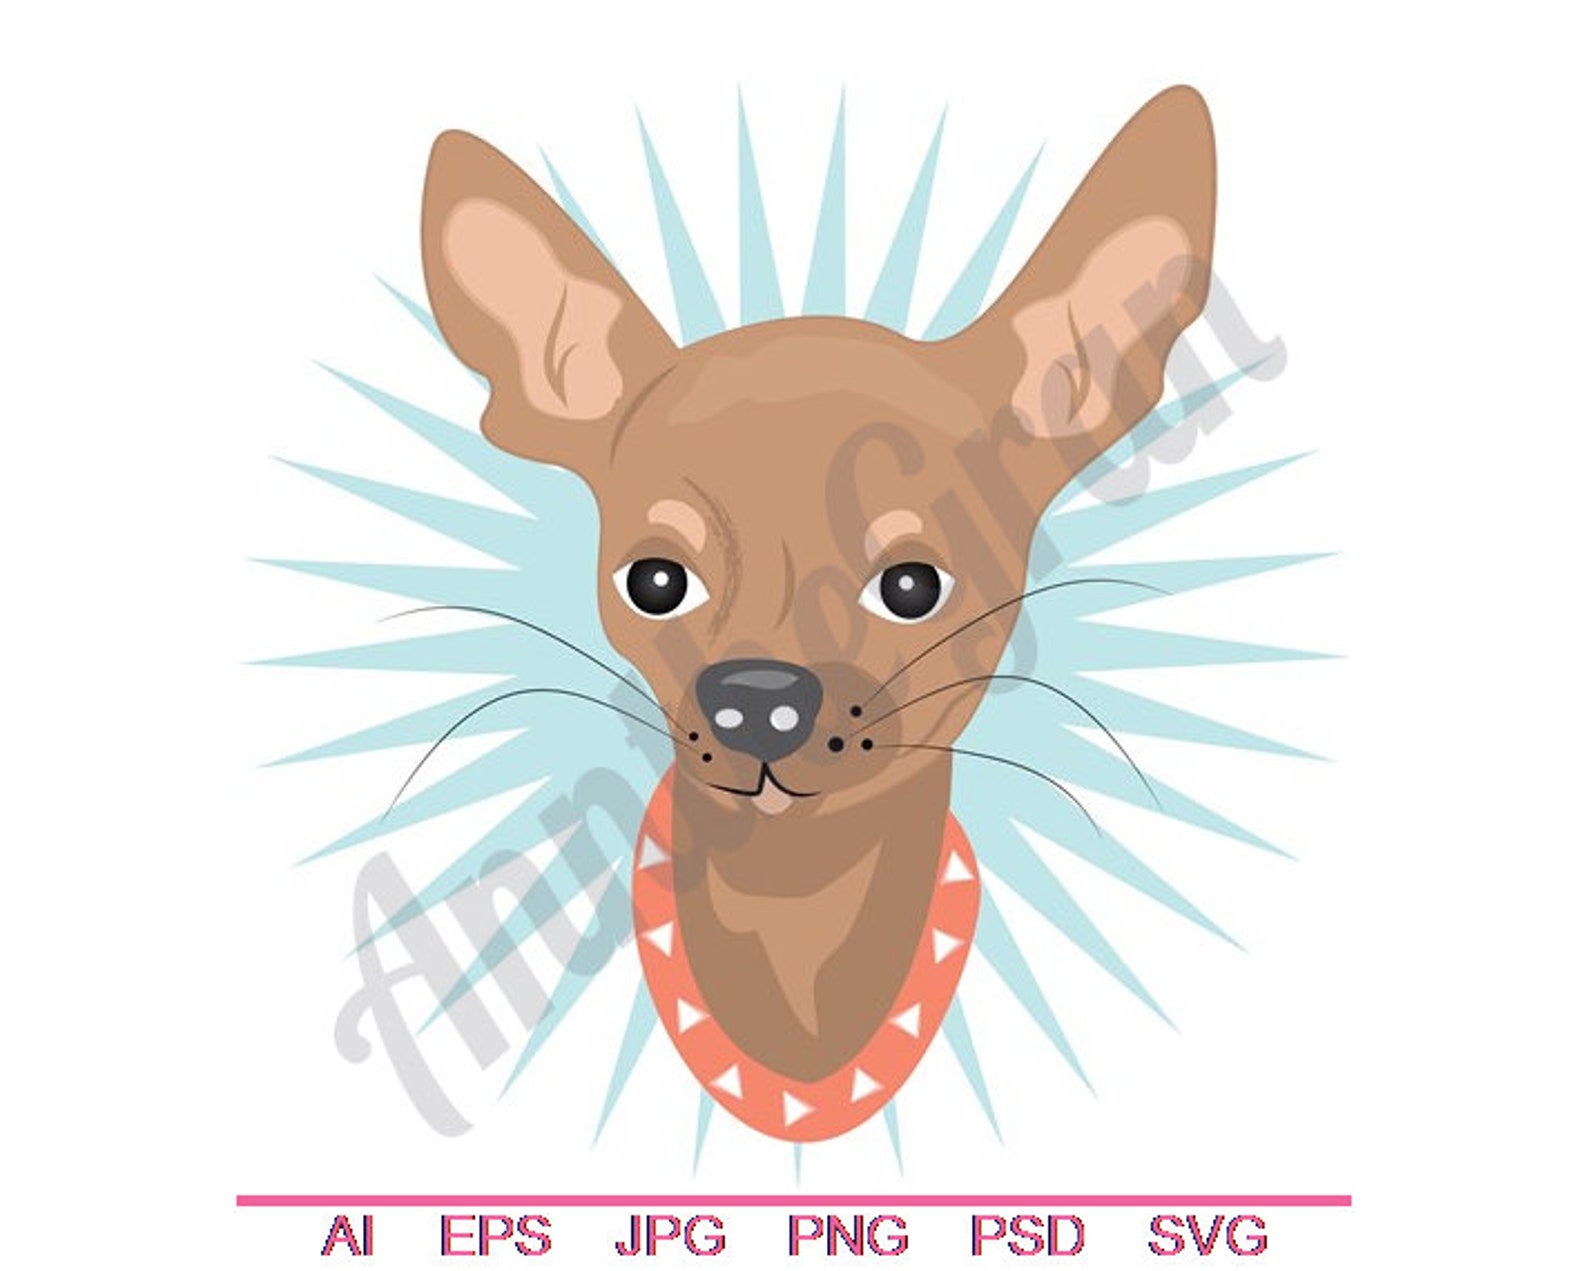 Chihuahua Head Svg Dxf Eps Png Jpg Vector Art Clipart | Etsy